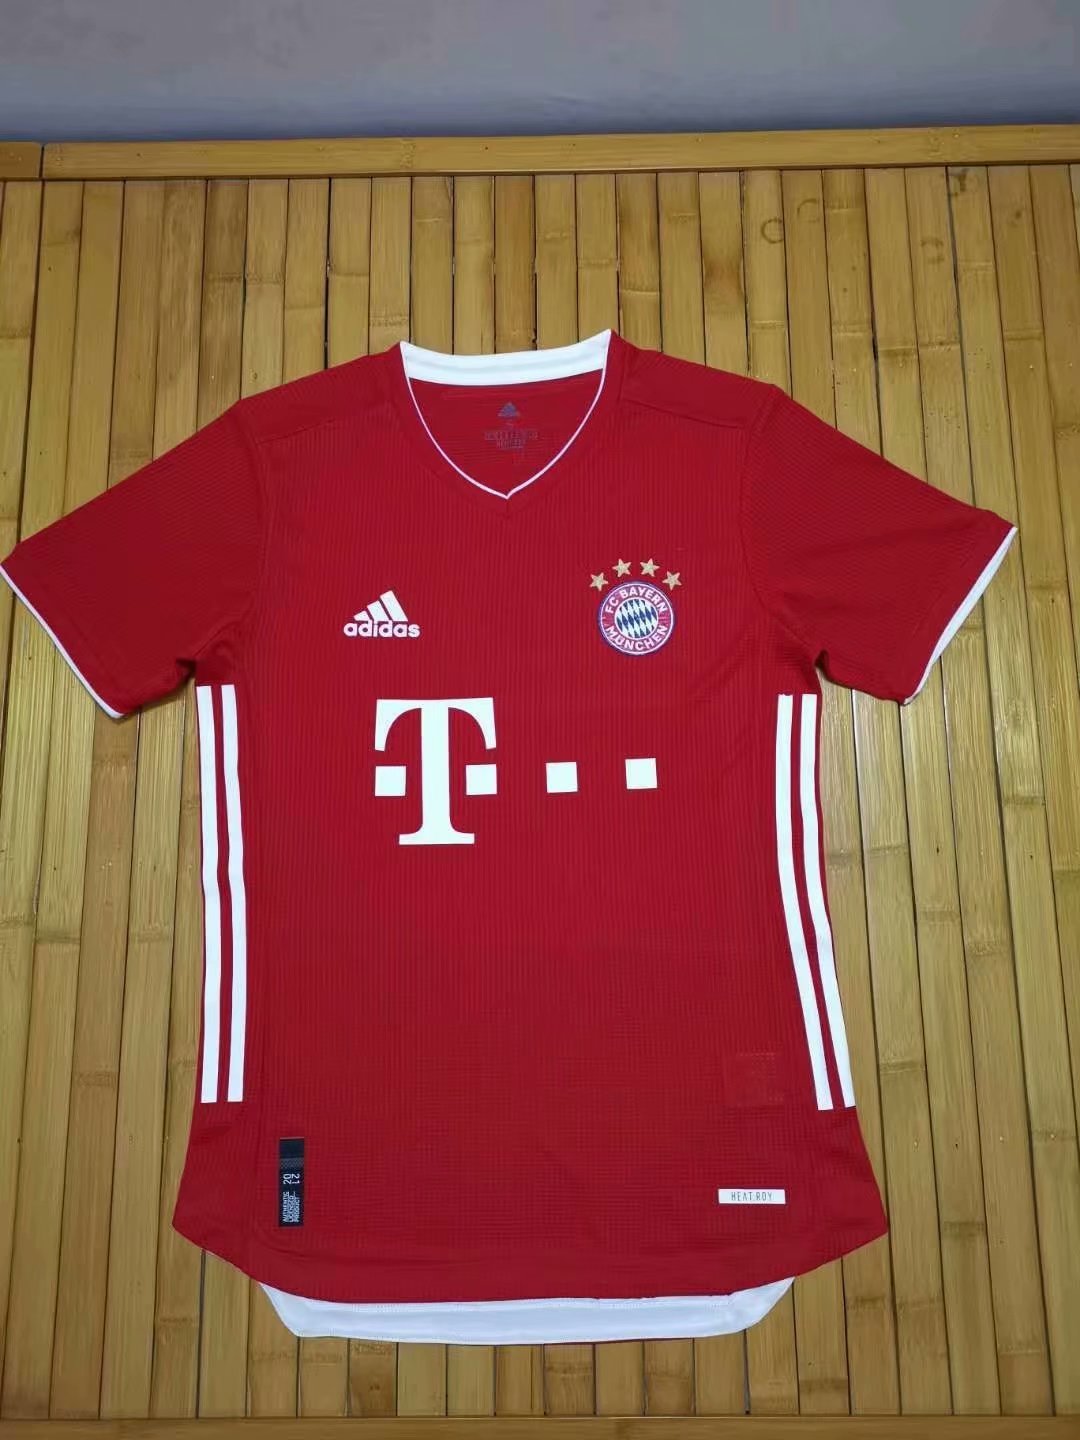 20/21 Adult Top players version shirt Bayern home red soccer jersey ...